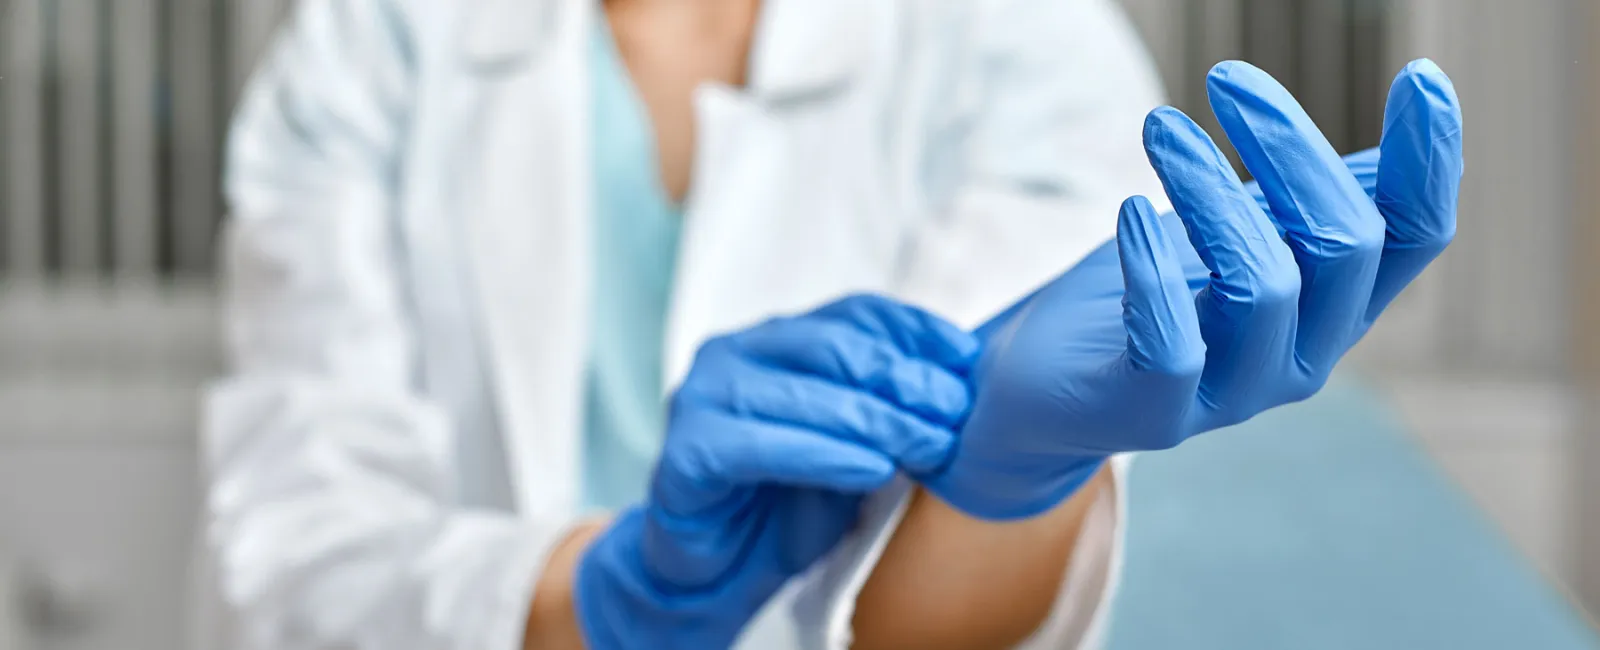 a medical professional wearing gloves